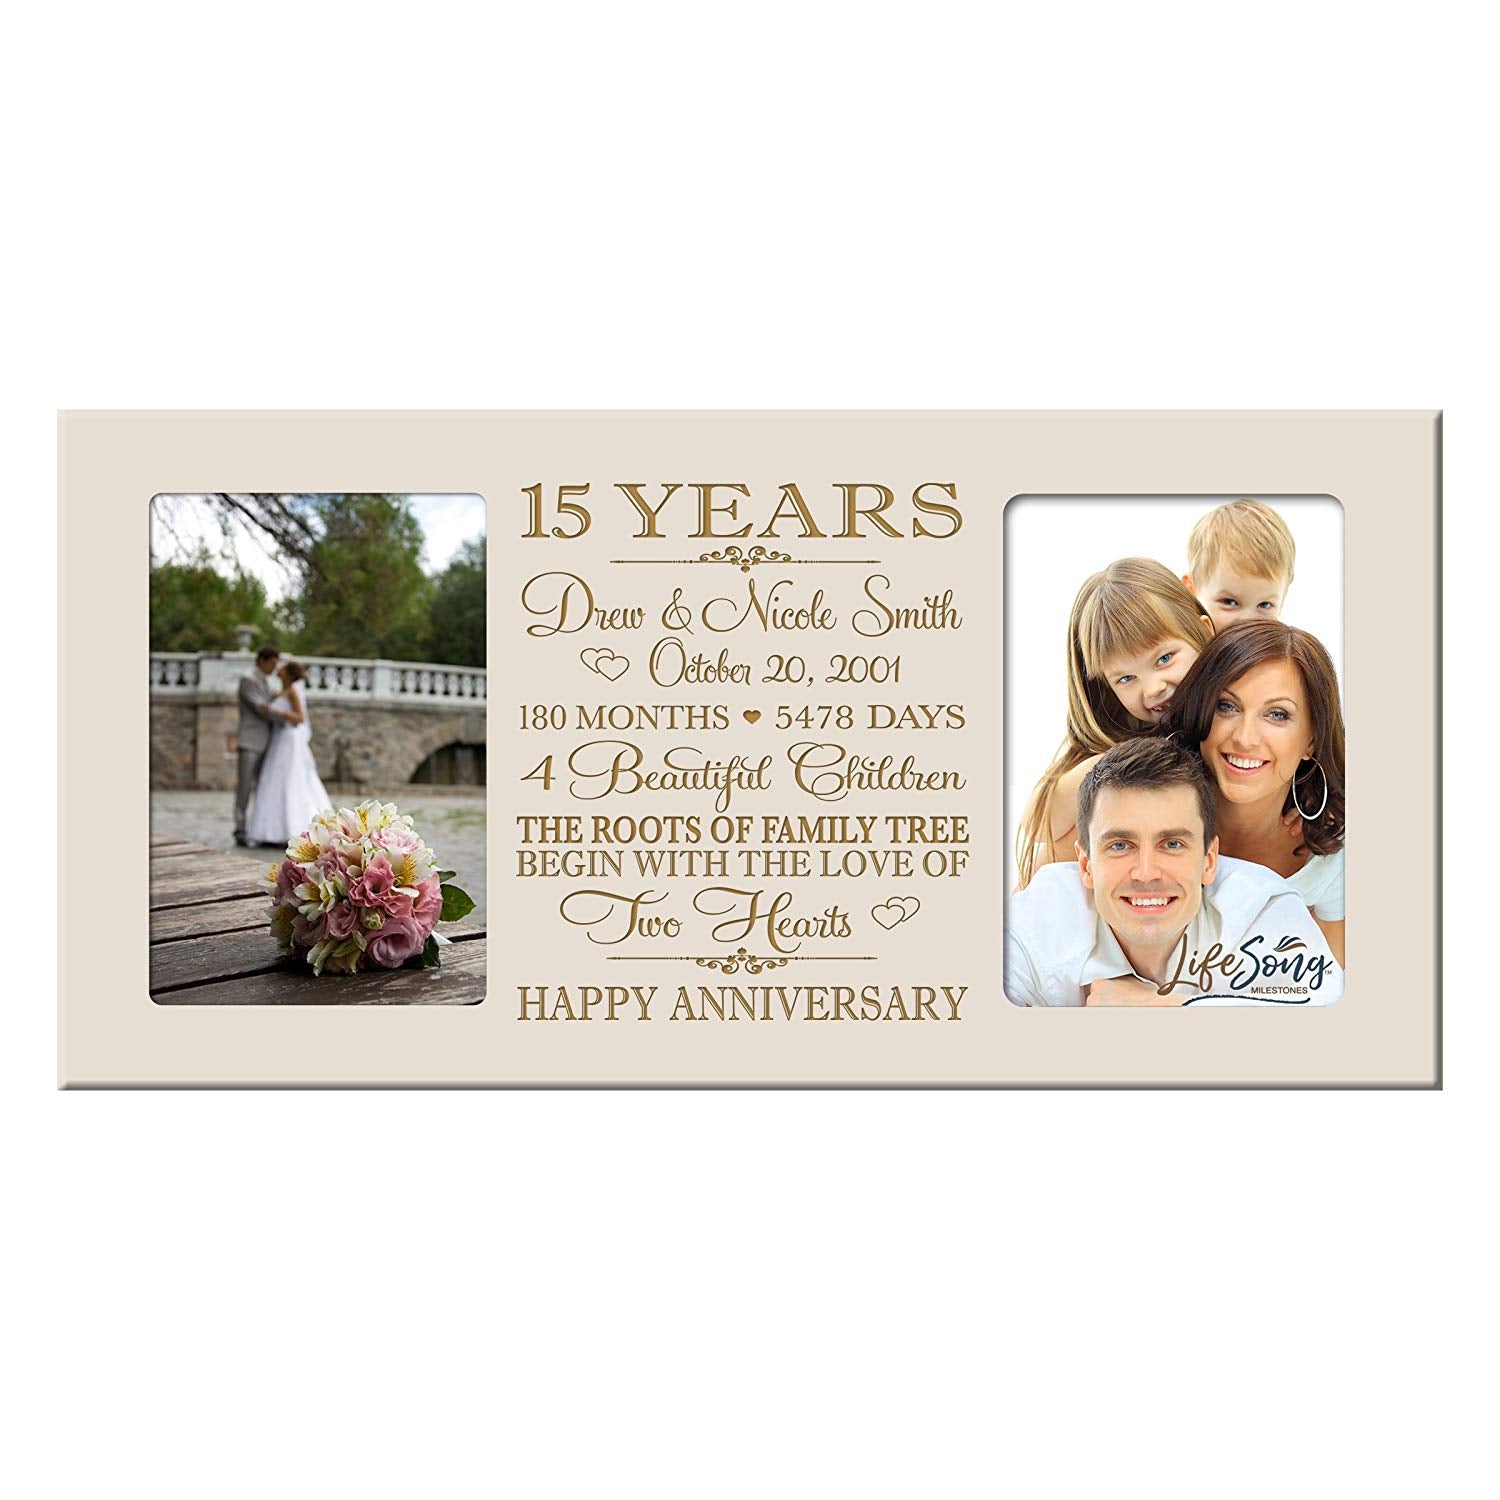 Lifesong Milestones Personalized Picture Frame for Couples 15th Wedding Anniversary Decorations